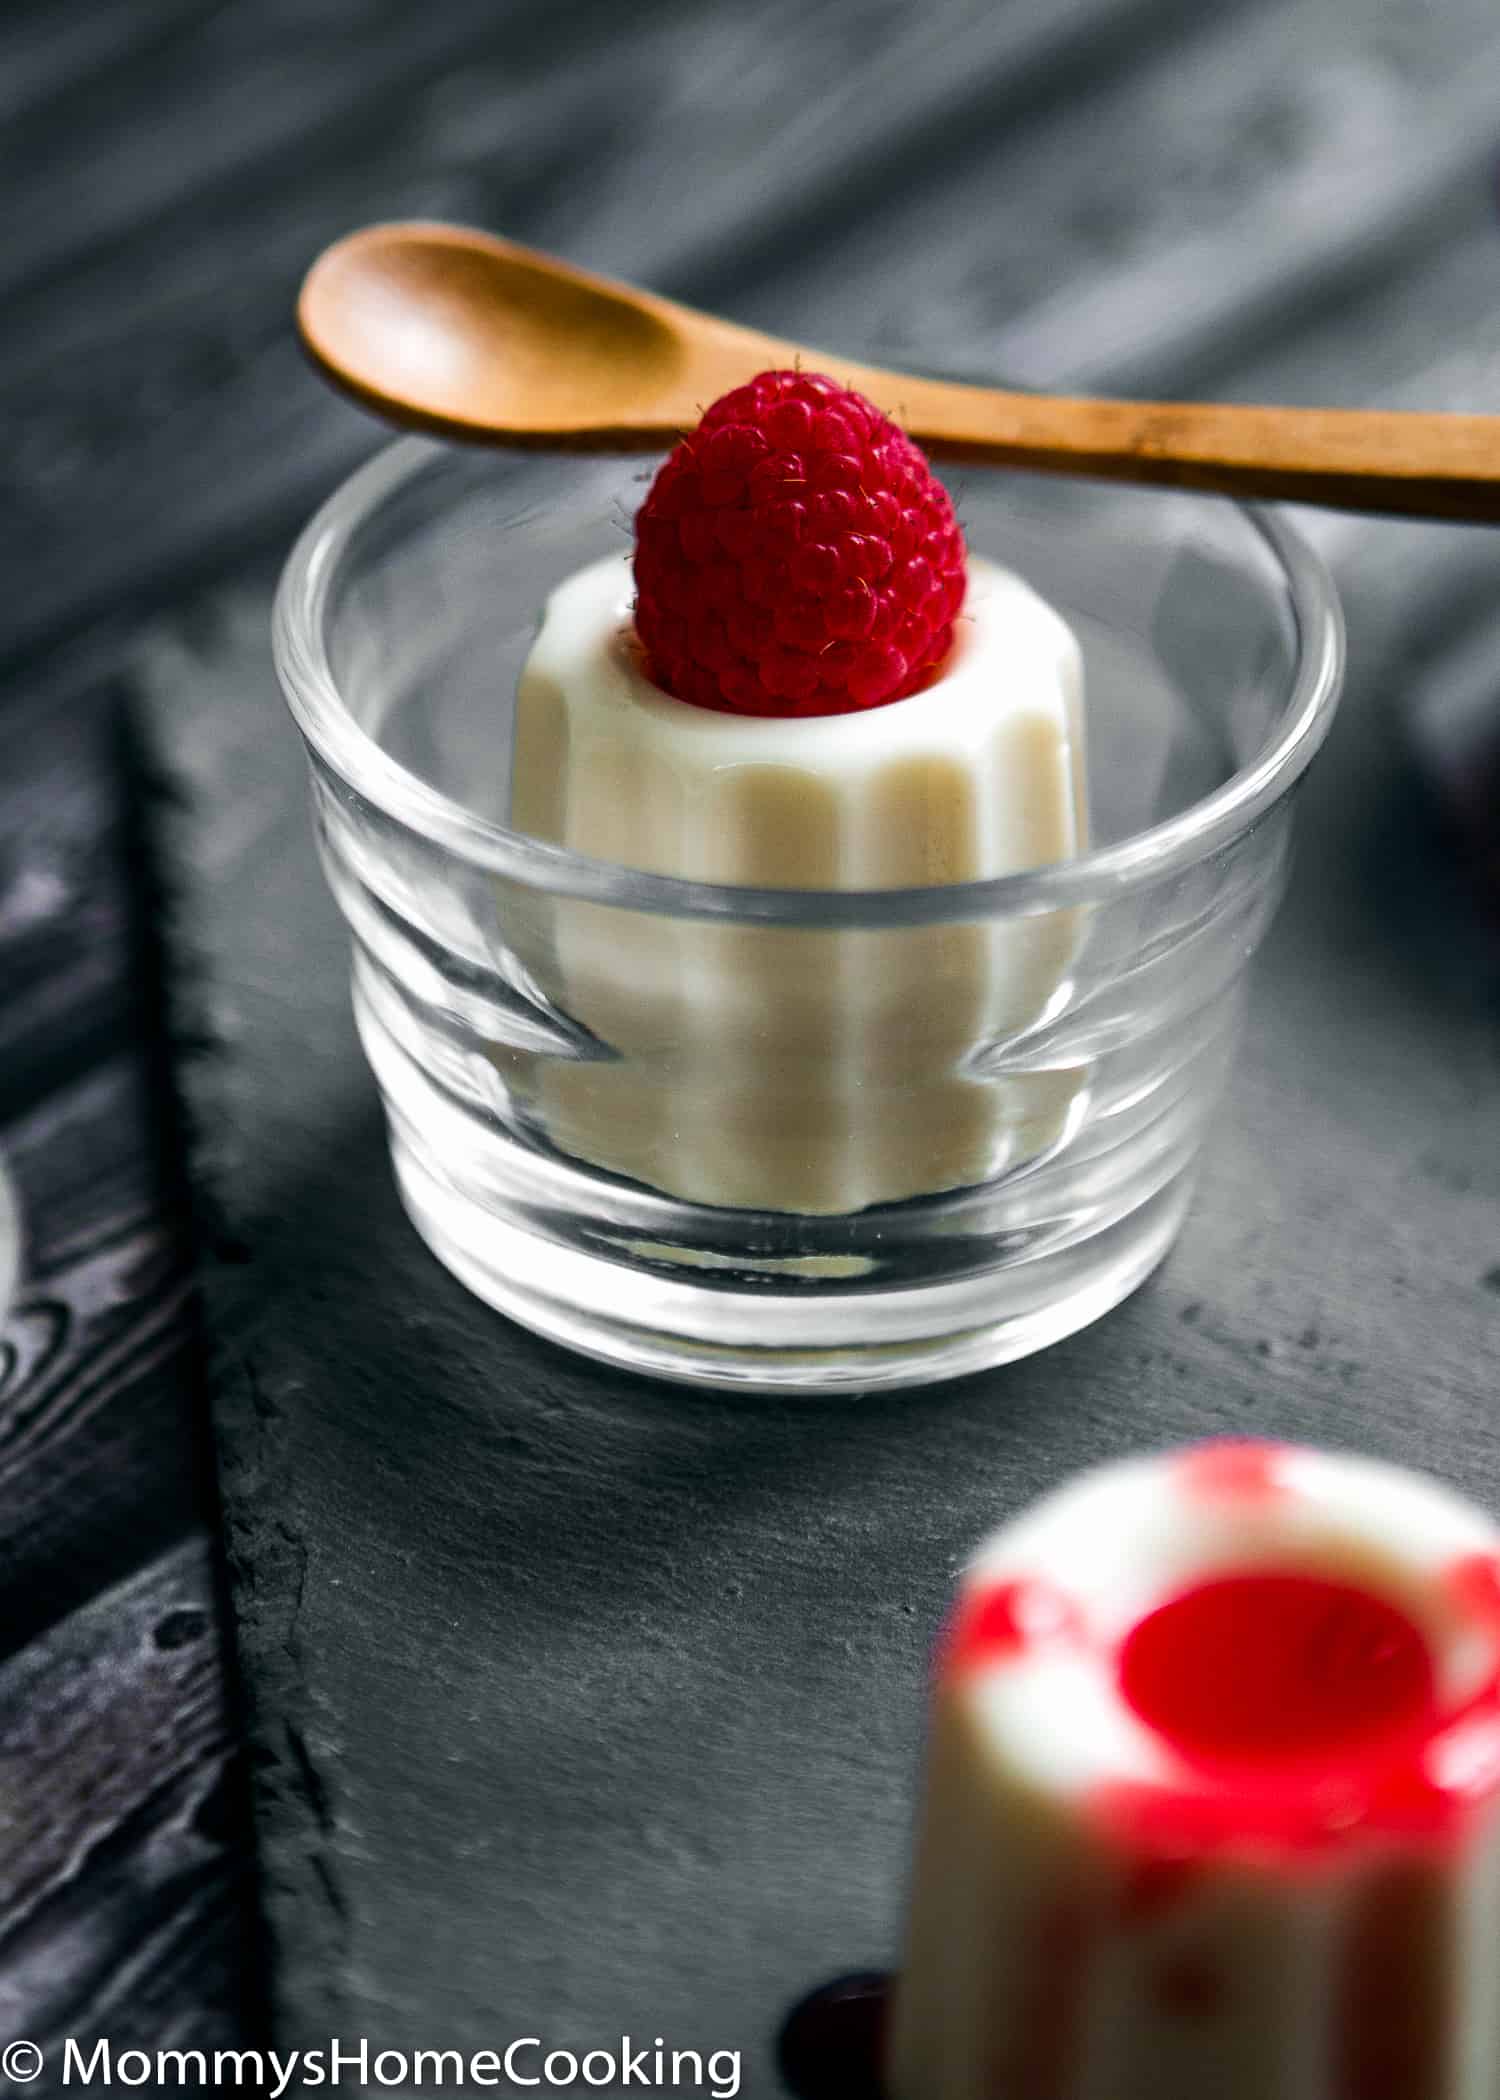 This Panna Cotta with Raspberry Coulis recipe is creamy, rich and silky! This amazingly creamy, melting in the mouth dessert is super easy to make with just 5 ingredients. https://mommyshomecooking.com